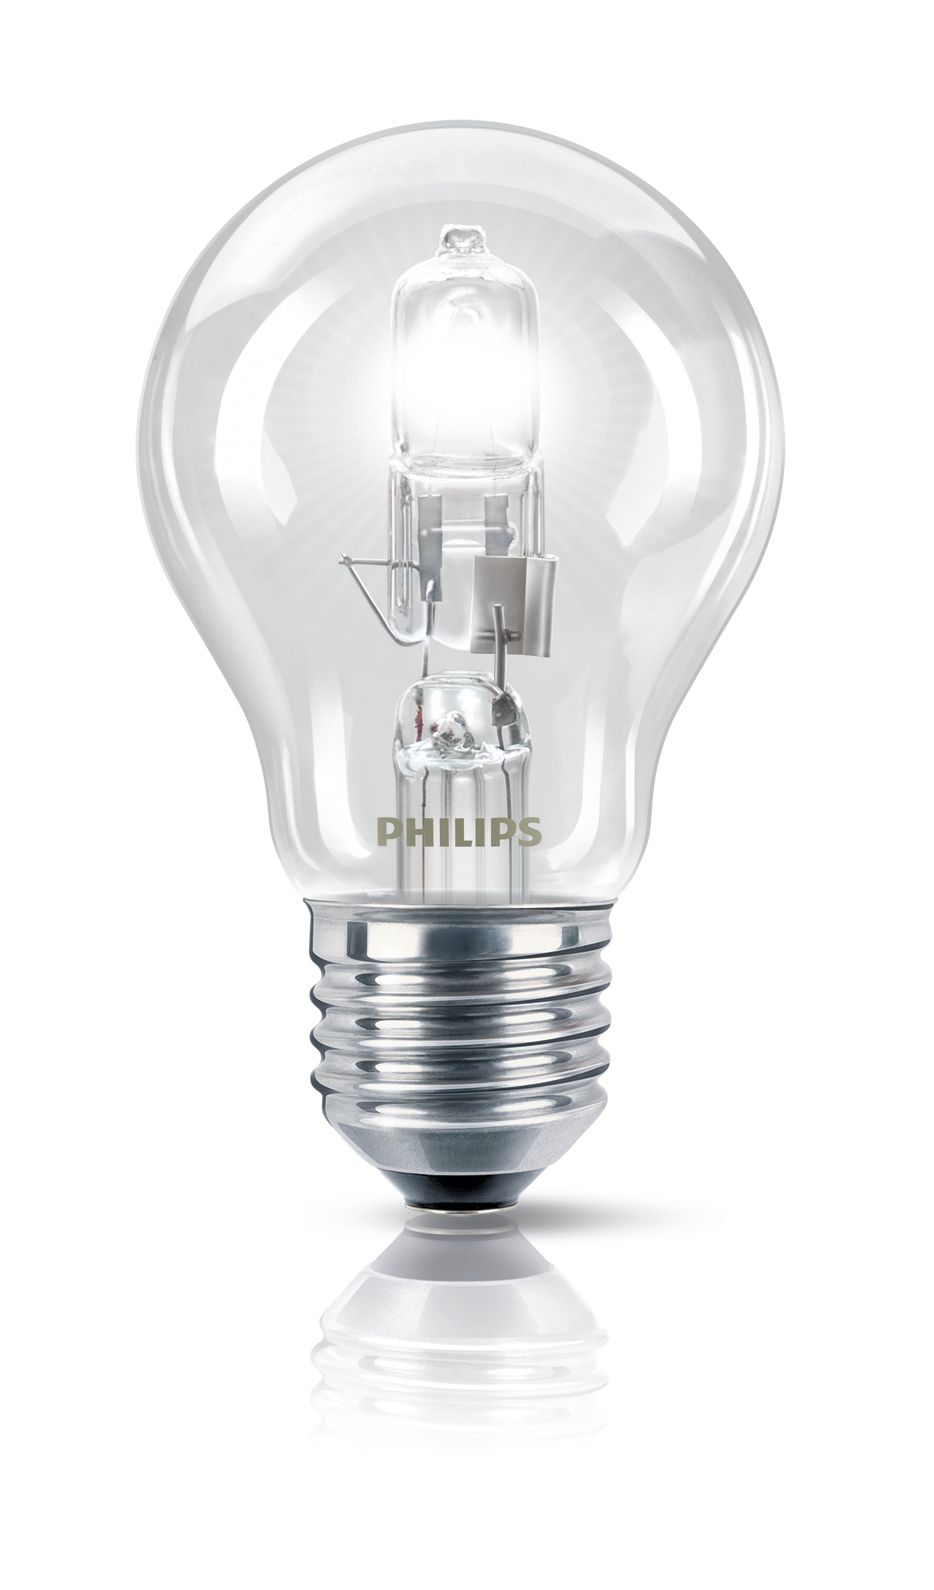 Philips 28w 240v BC /B22 Clear Halogen Golfball 370lm Dimmable X5 